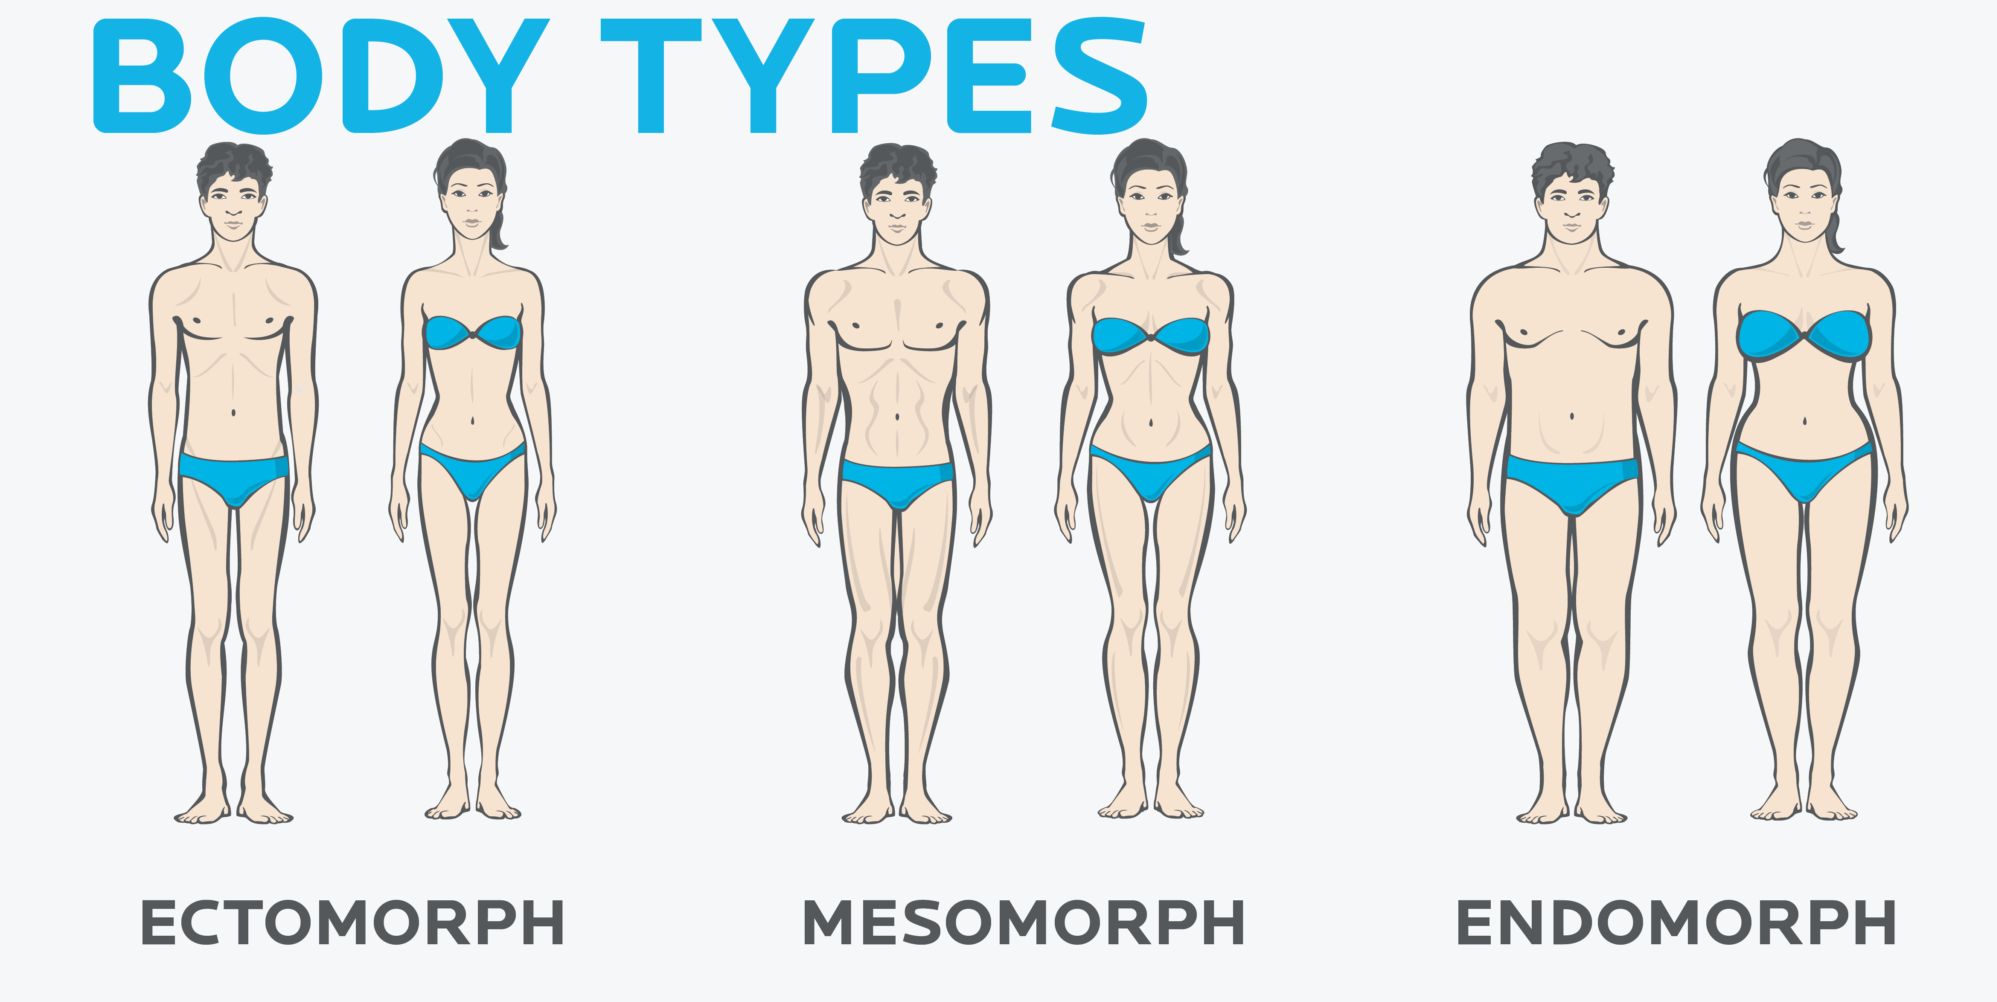 Understanding the 3 Body Types Can Produce Better Health Results